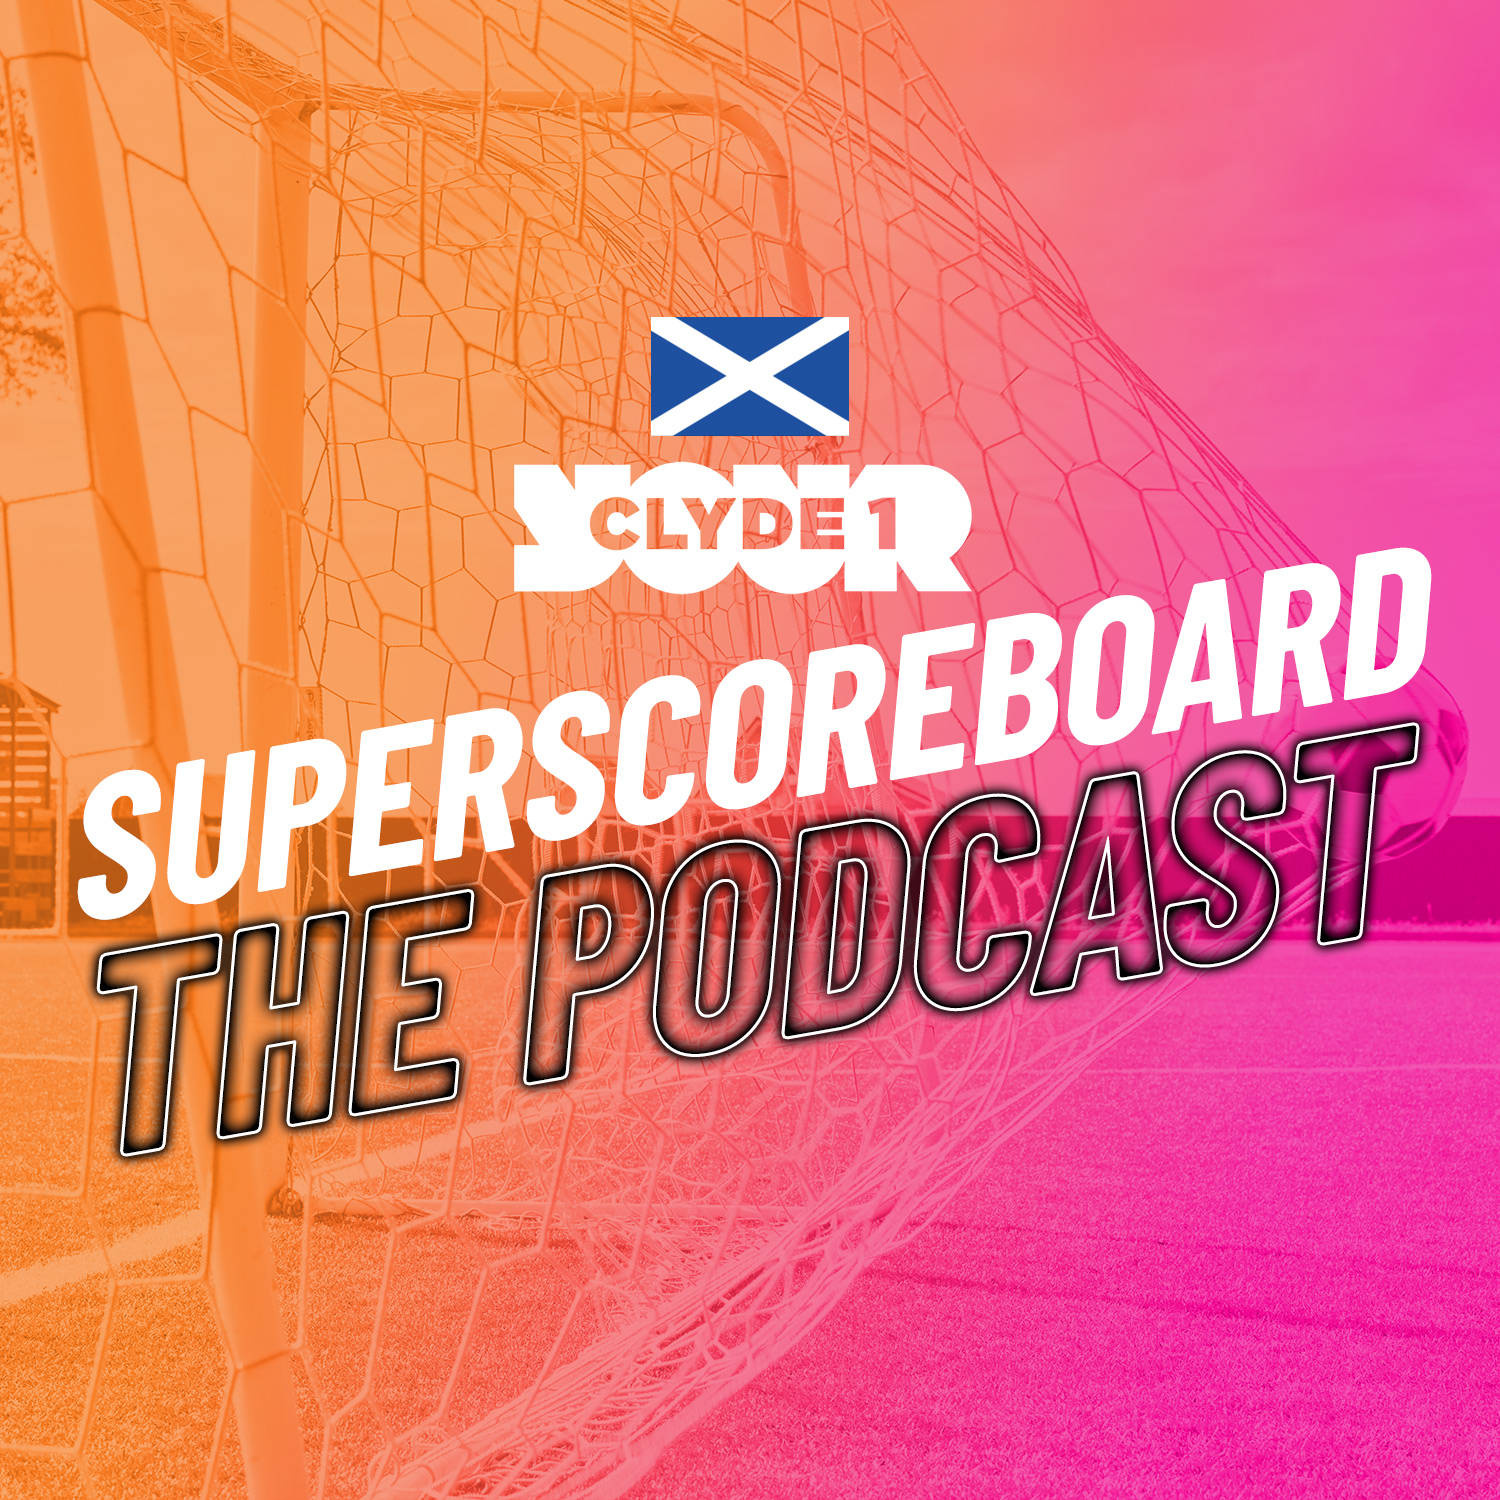 Friday 8th March Clyde 1 Superscoreboard